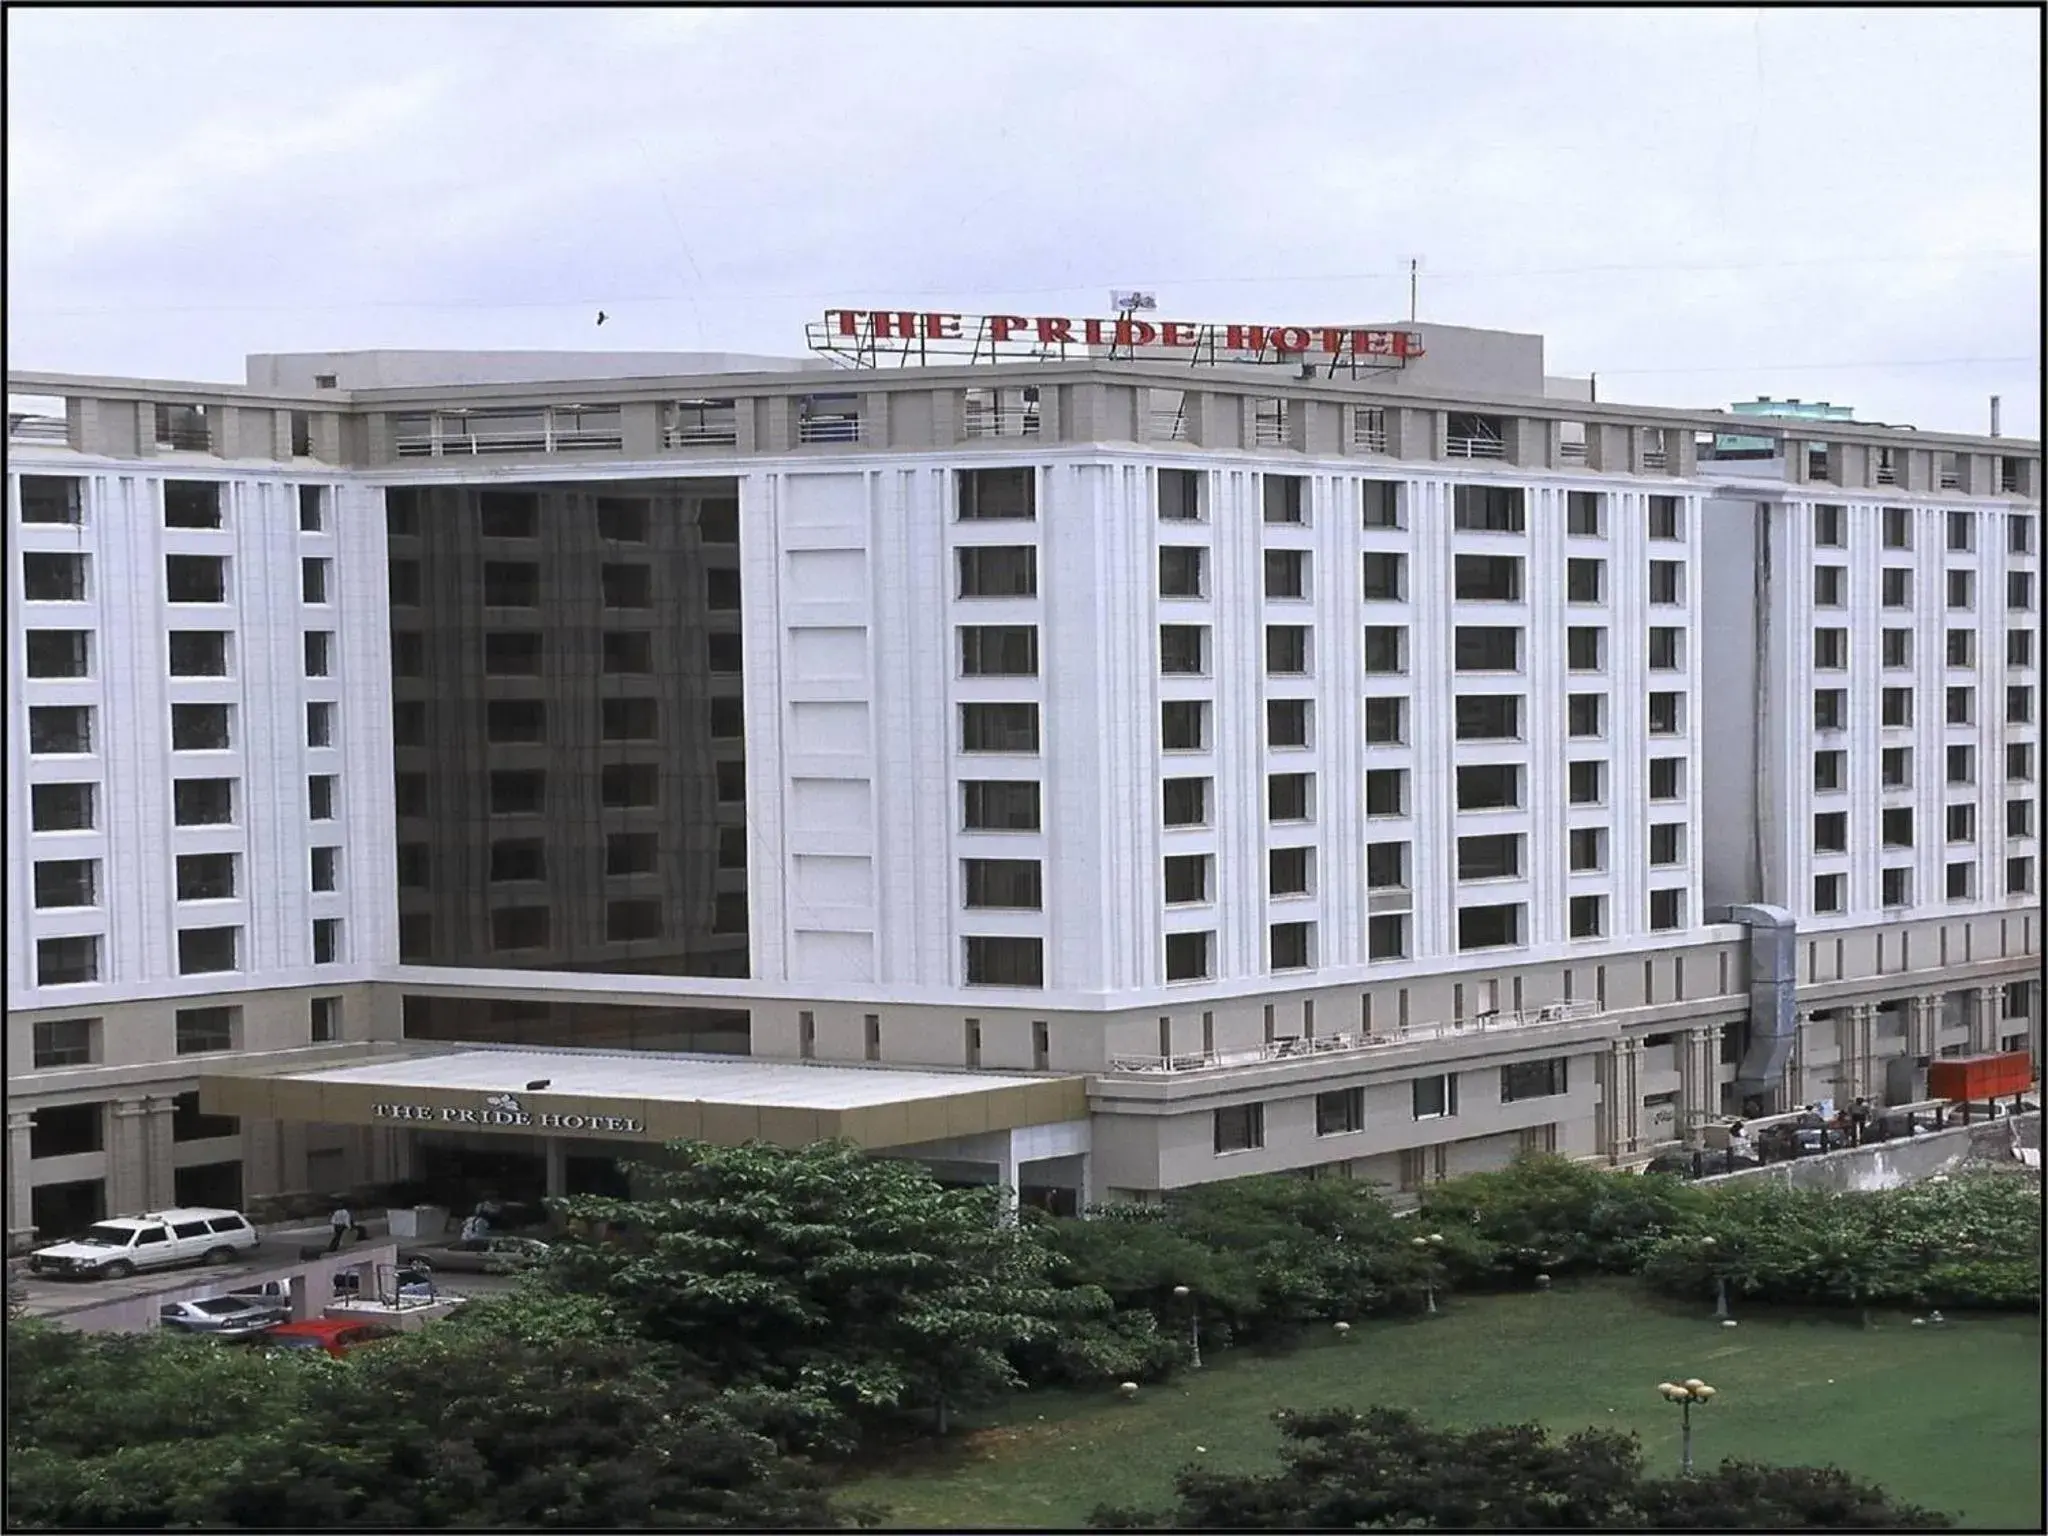 Property building in Pride Plaza Hotel, Ahmedabad